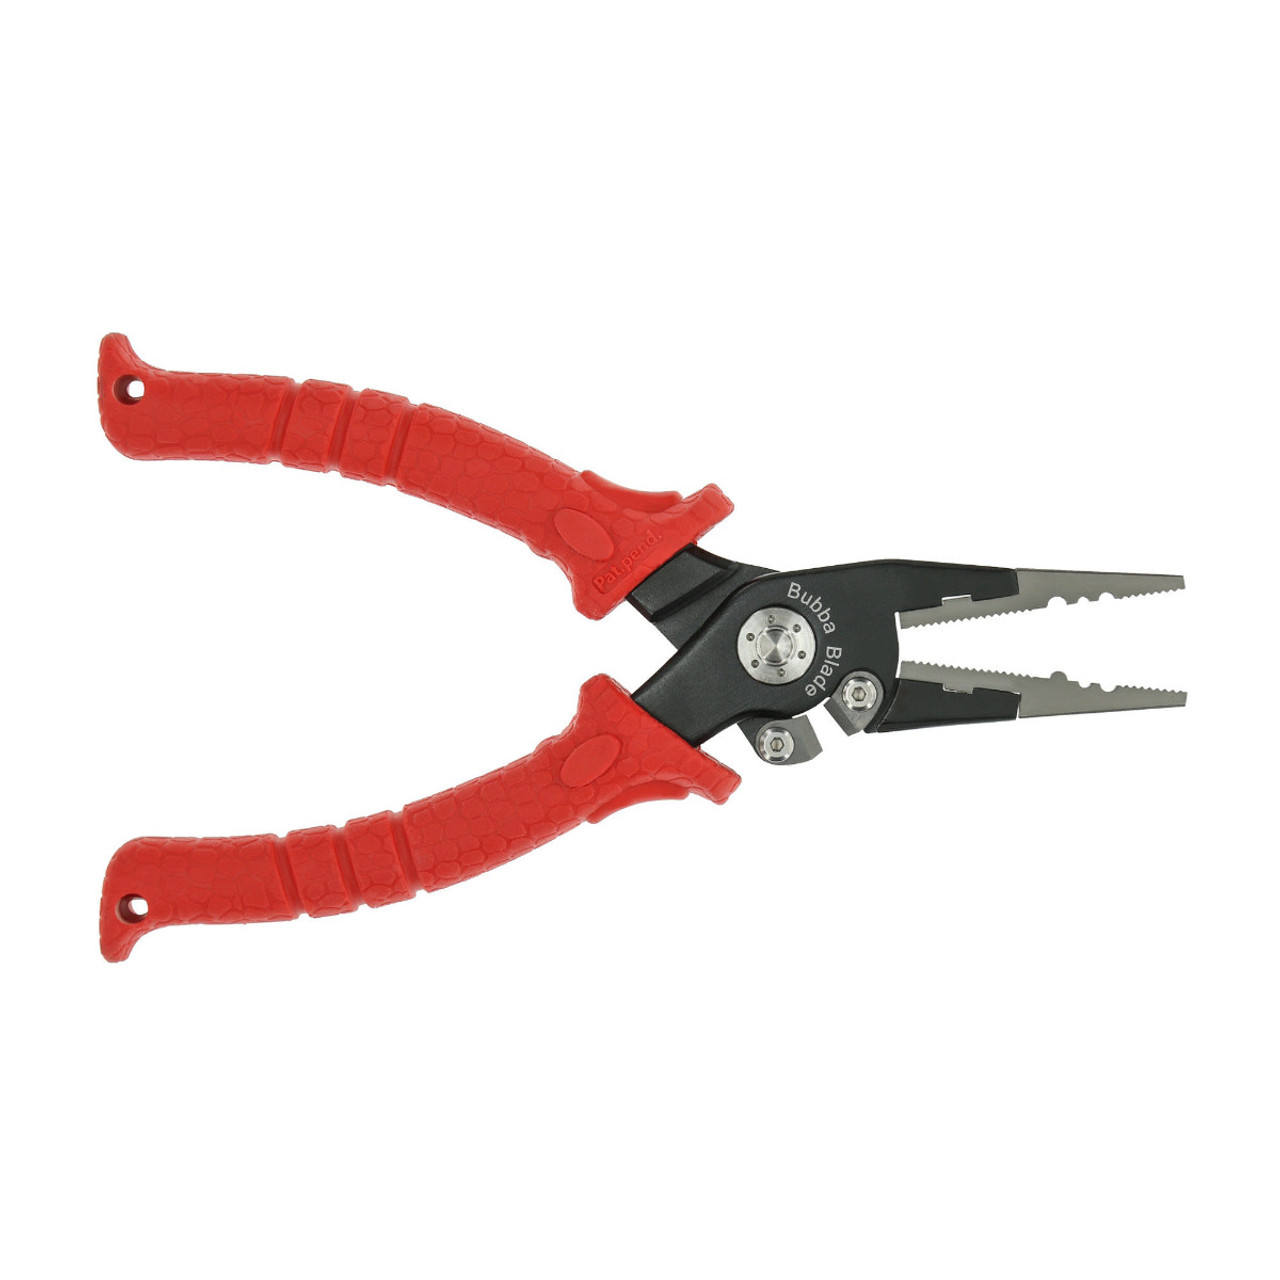 Bubba Fishing Plier 1FP, 7.5 Overall Length, Red TPR Handle